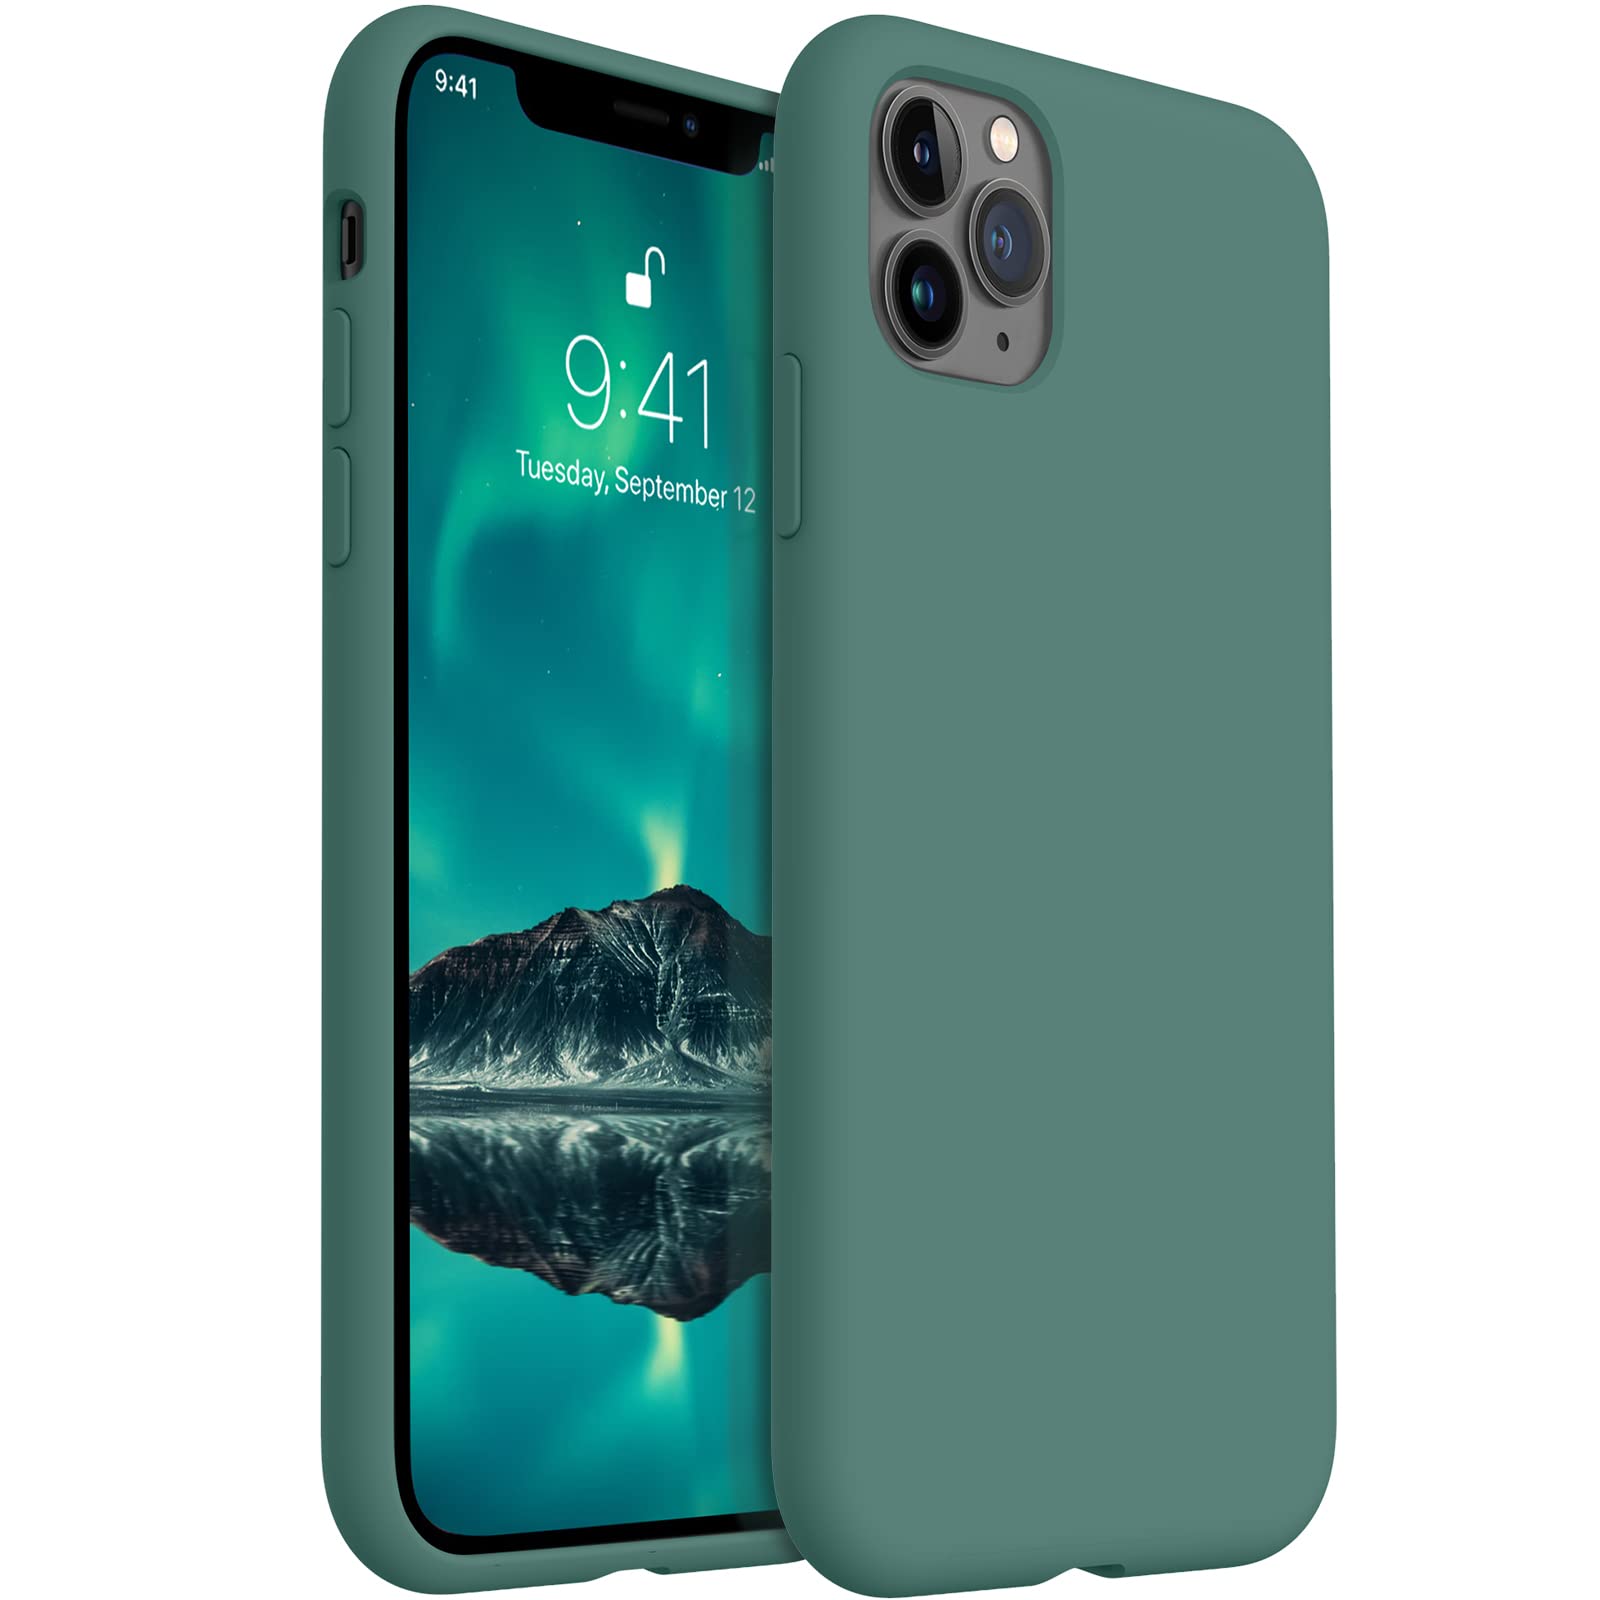 Aotesier Liquid Silicone Iphone 11 Pro Max Case,Slim Fit Full Body Protection Shockproof Cover Compatible With Iphone 11 Pro Max